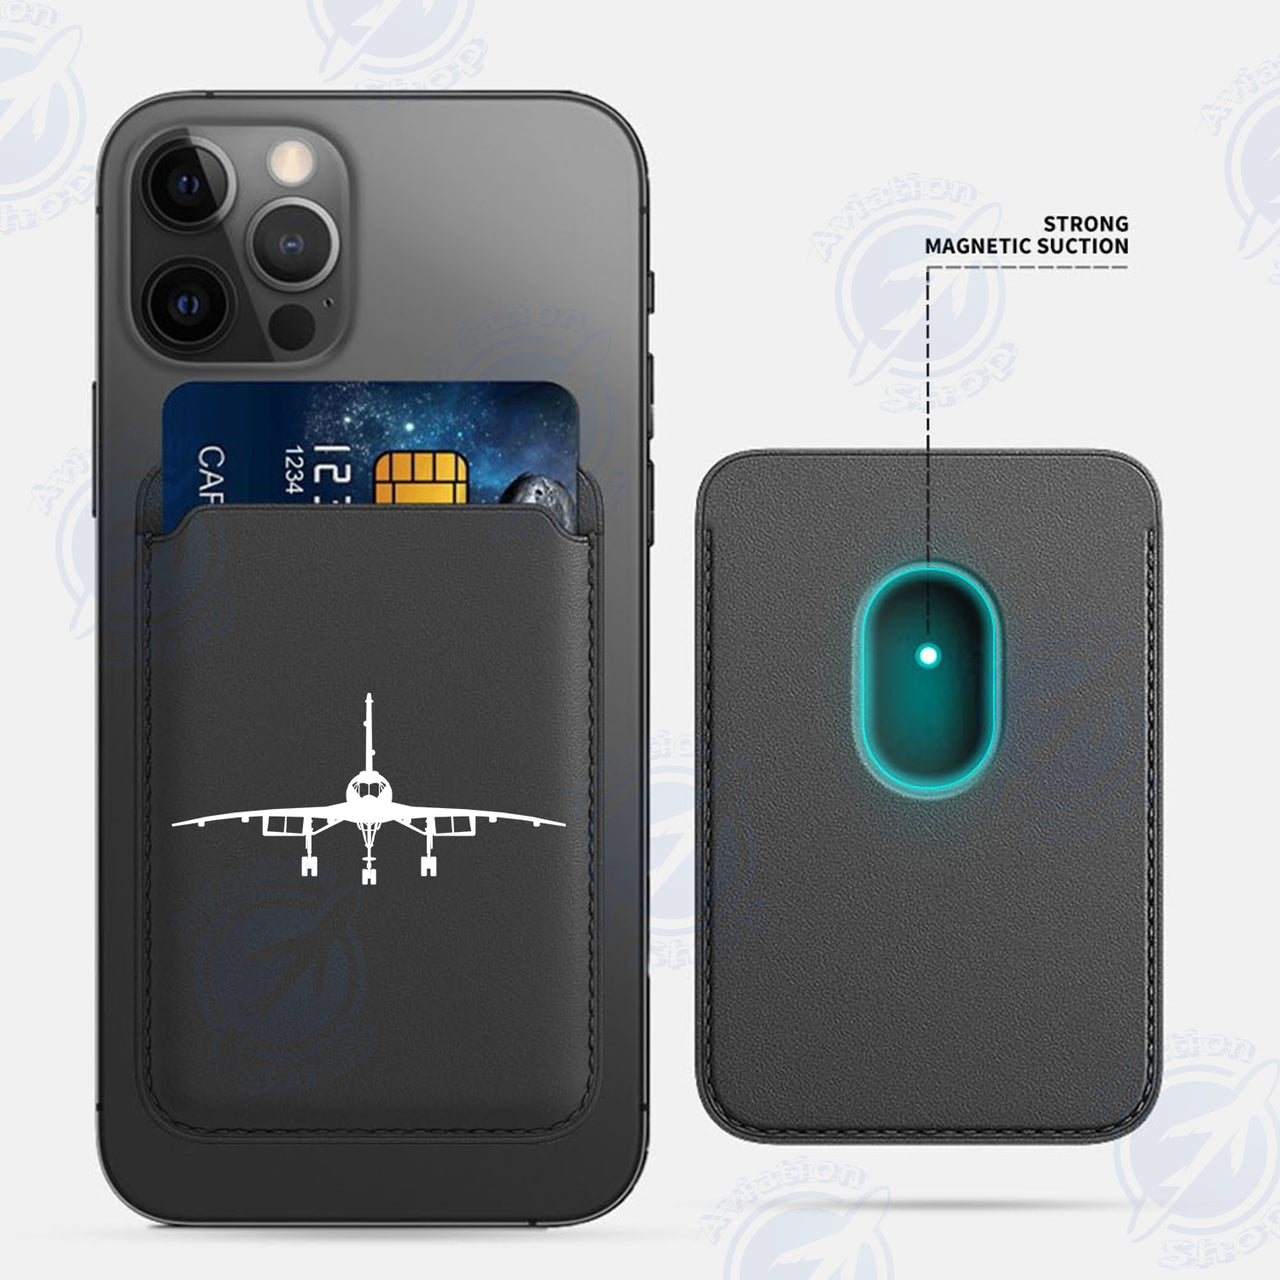 Concorde Silhouette iPhone Cases Magnetic Card Wallet